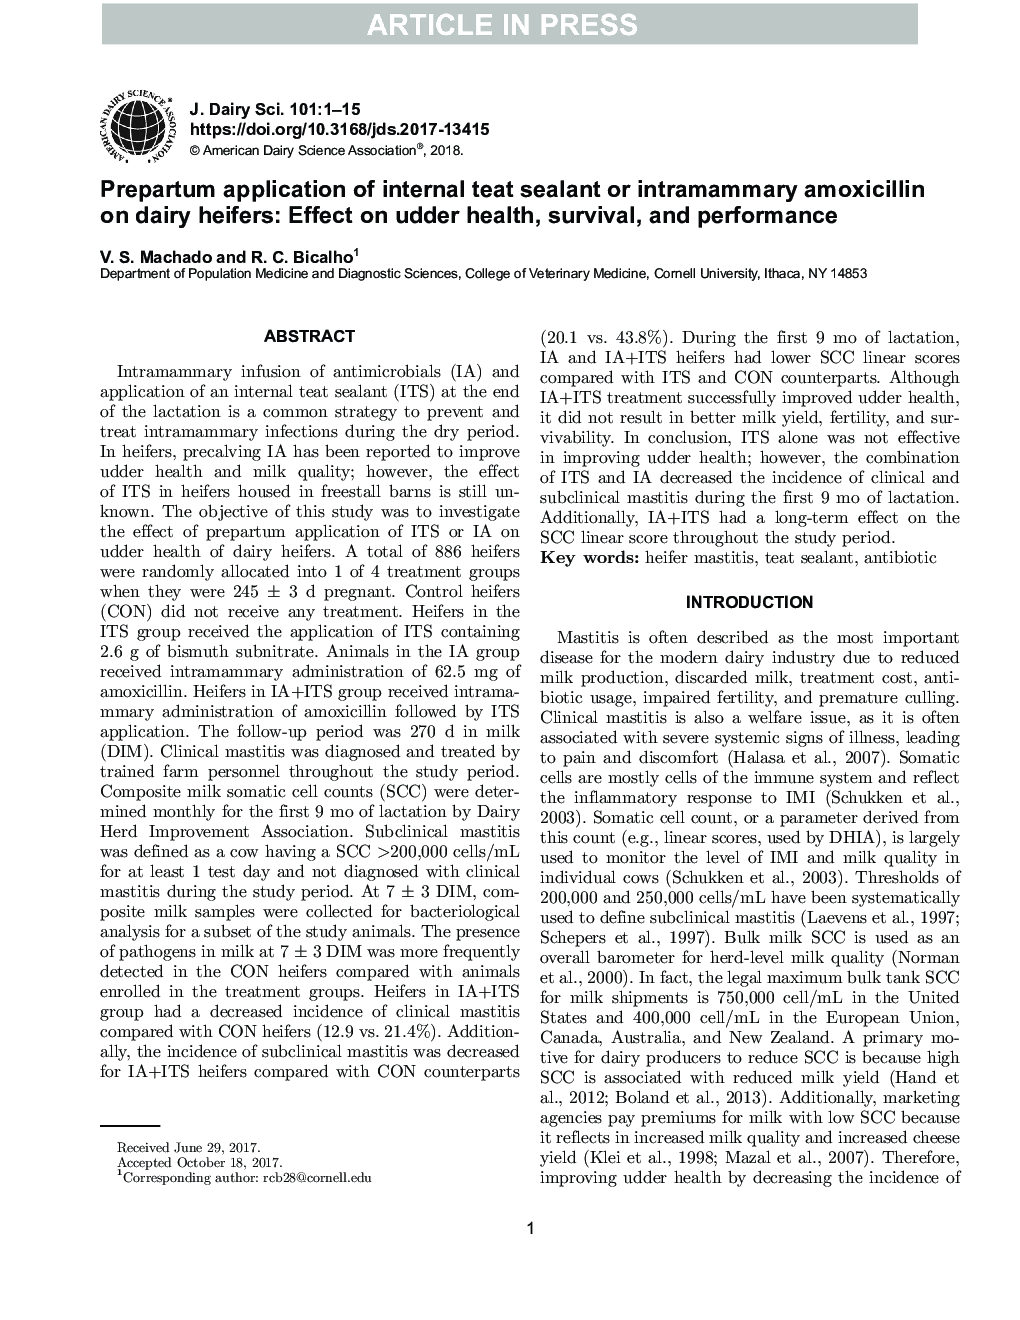 Prepartum application of internal teat sealant or intramammary amoxicillin on dairy heifers: Effect on udder health, survival, and performance